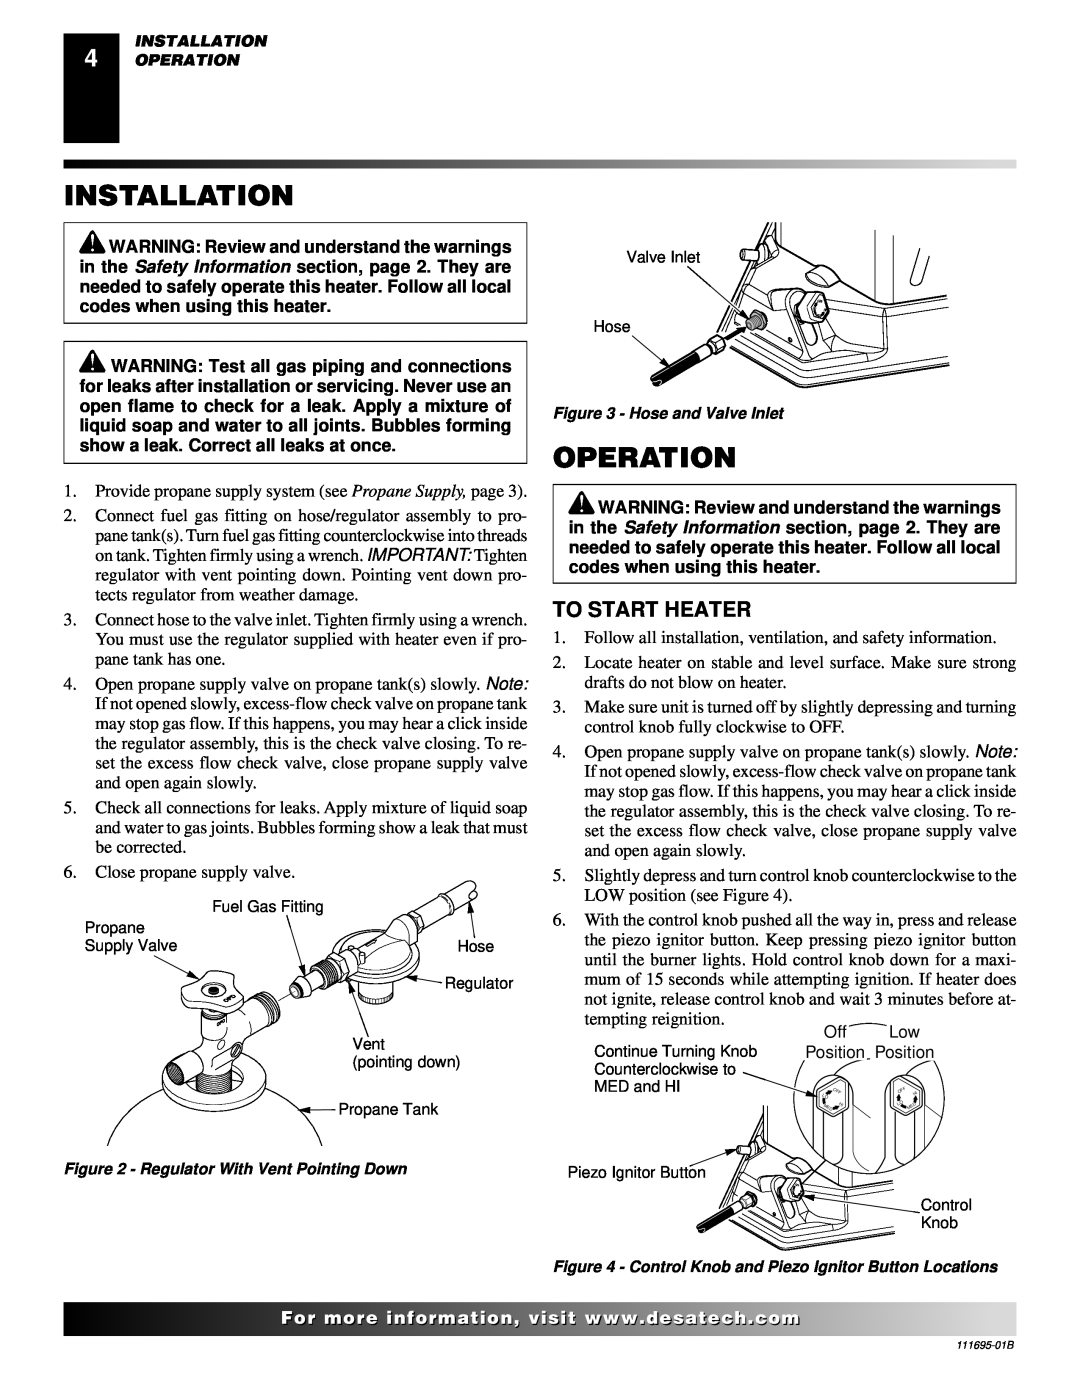 Desa PROPANE CONSTRUCTION CONVECTION HEATER owner manual Installation, Operation, To Start Heater 